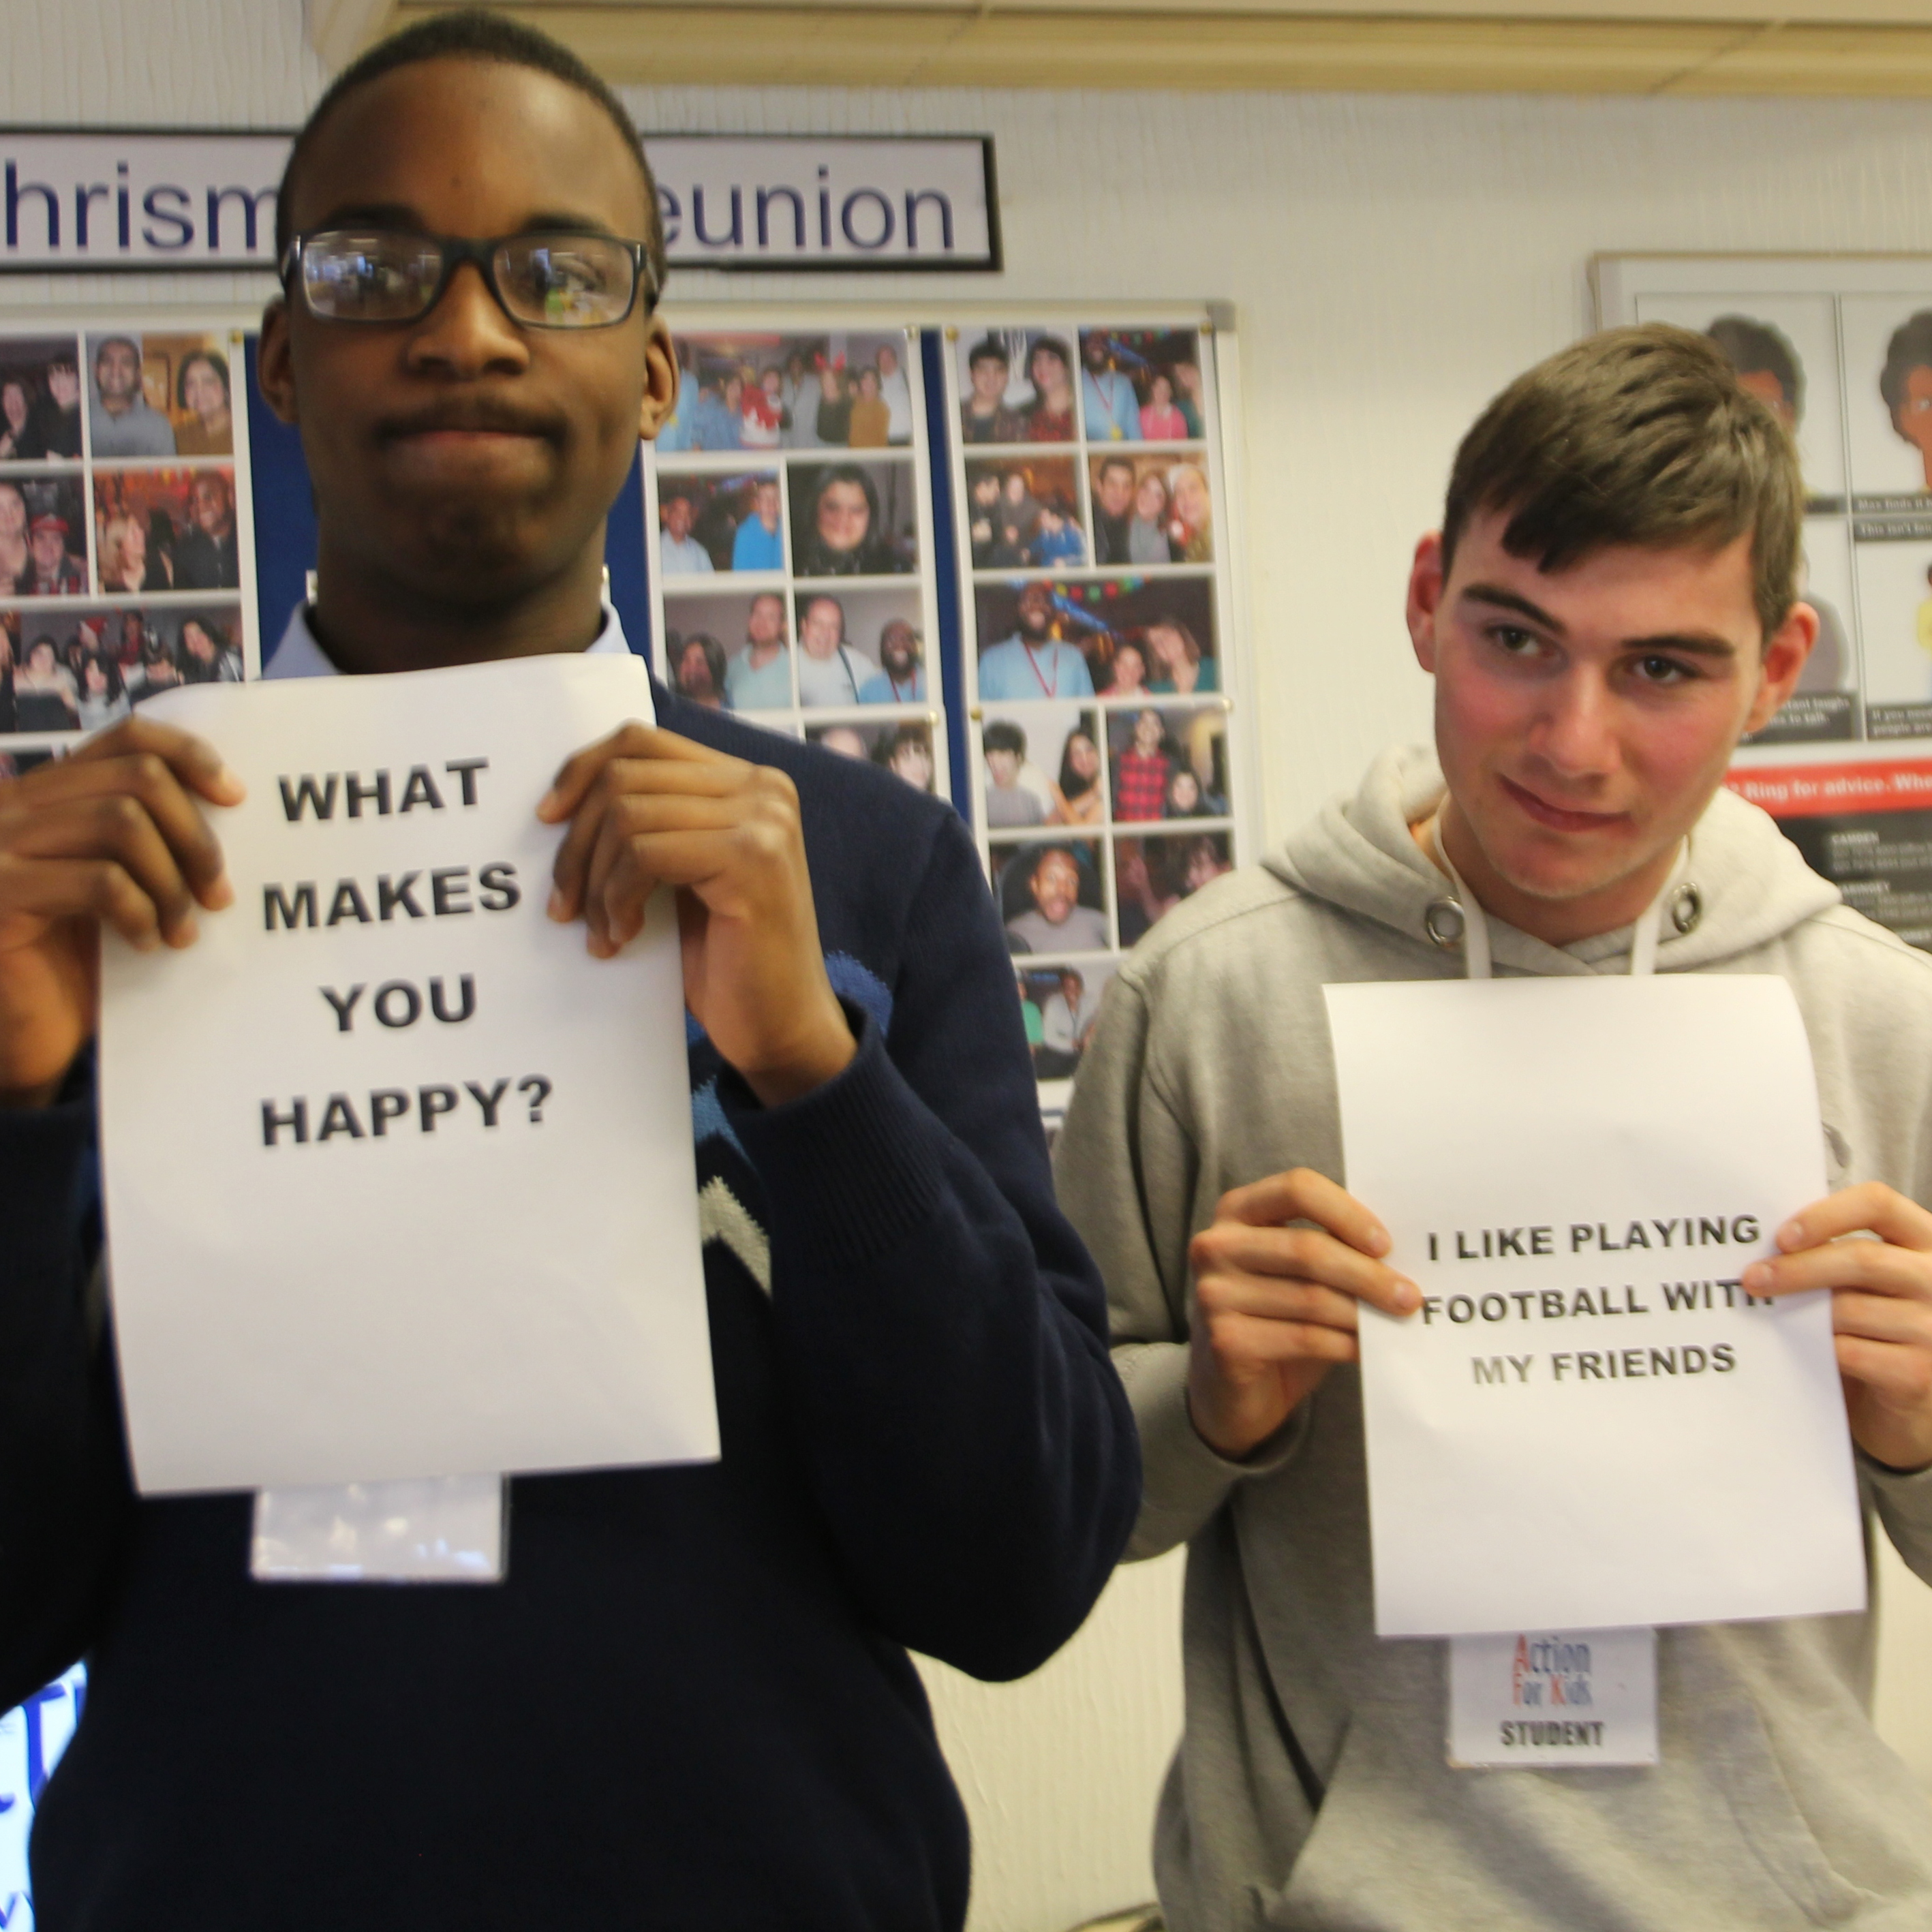 two people are holding signs, one says "what makes you happy?" the other says "I like playing football with my friends"